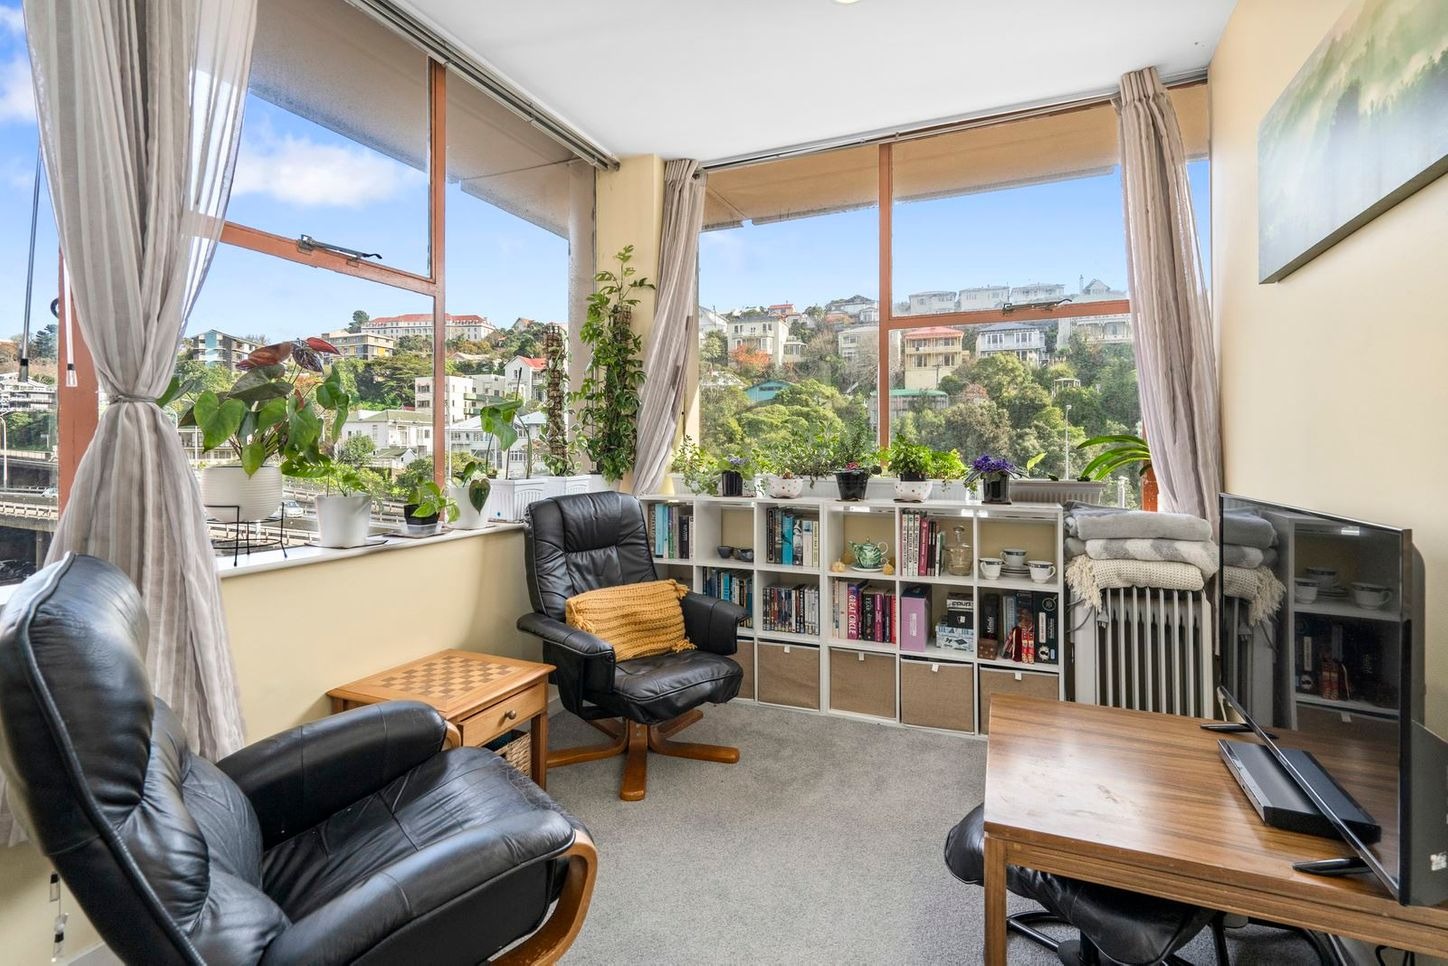 Real Estate For Rent Houses & Apartments : 2-Bedroom Apartment with Stunning Views, Wellington